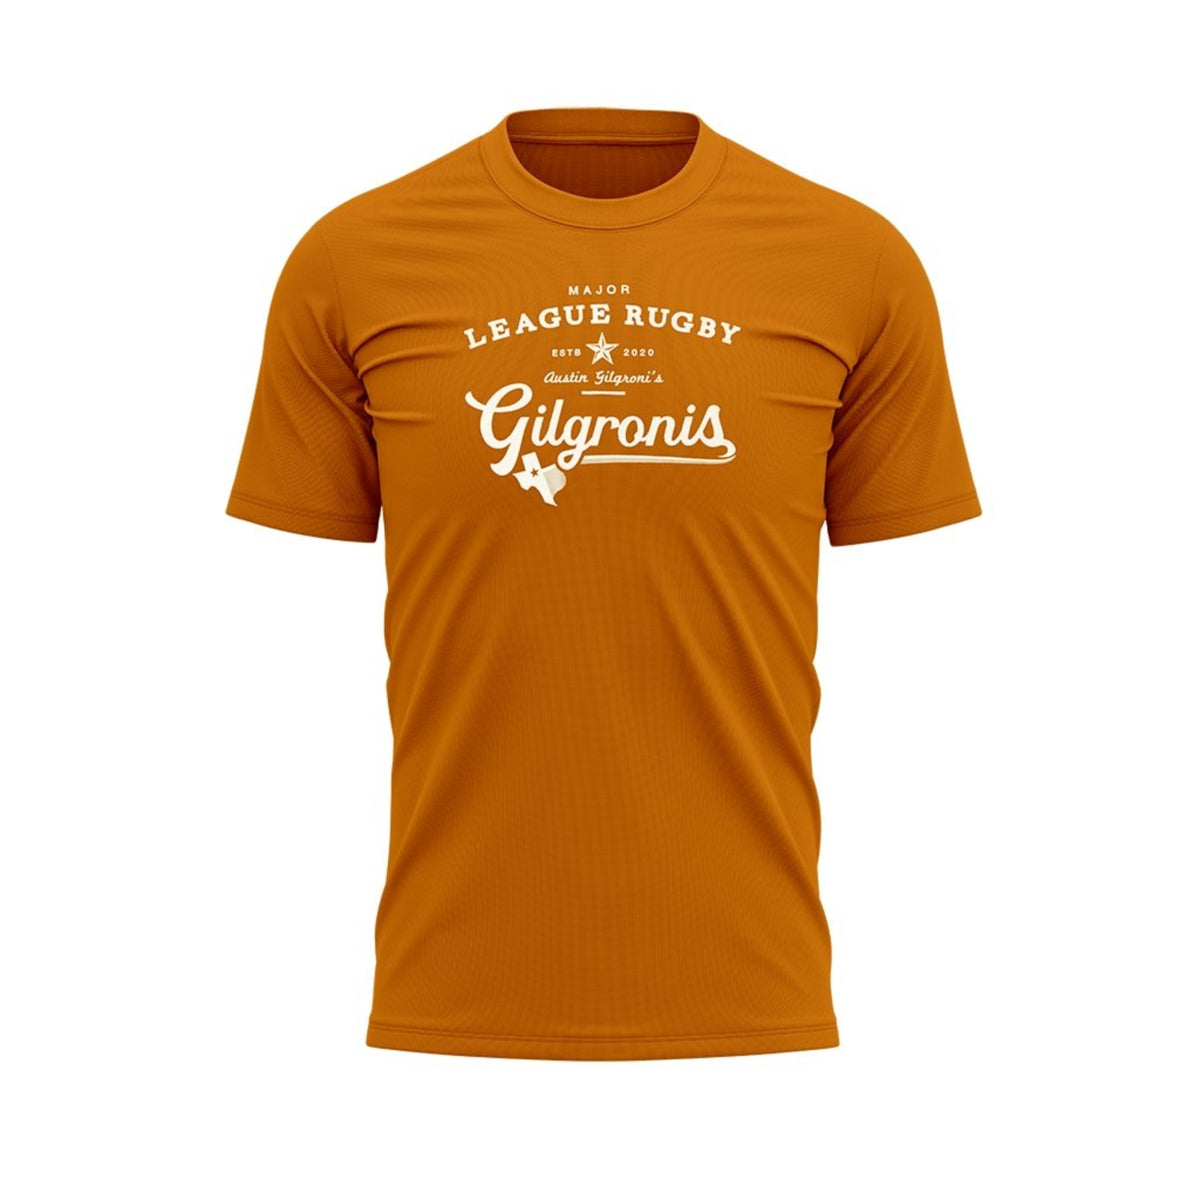 AG Rugby 2020 Gilgronis Graphic Tee - Adult Unisex - www.therugbyshop.com www.therugbyshop.com ADULT UNISEX / ORANGE / S XIX Brands TEES AG Rugby 2020 Gilgronis Graphic Tee - Adult Unisex